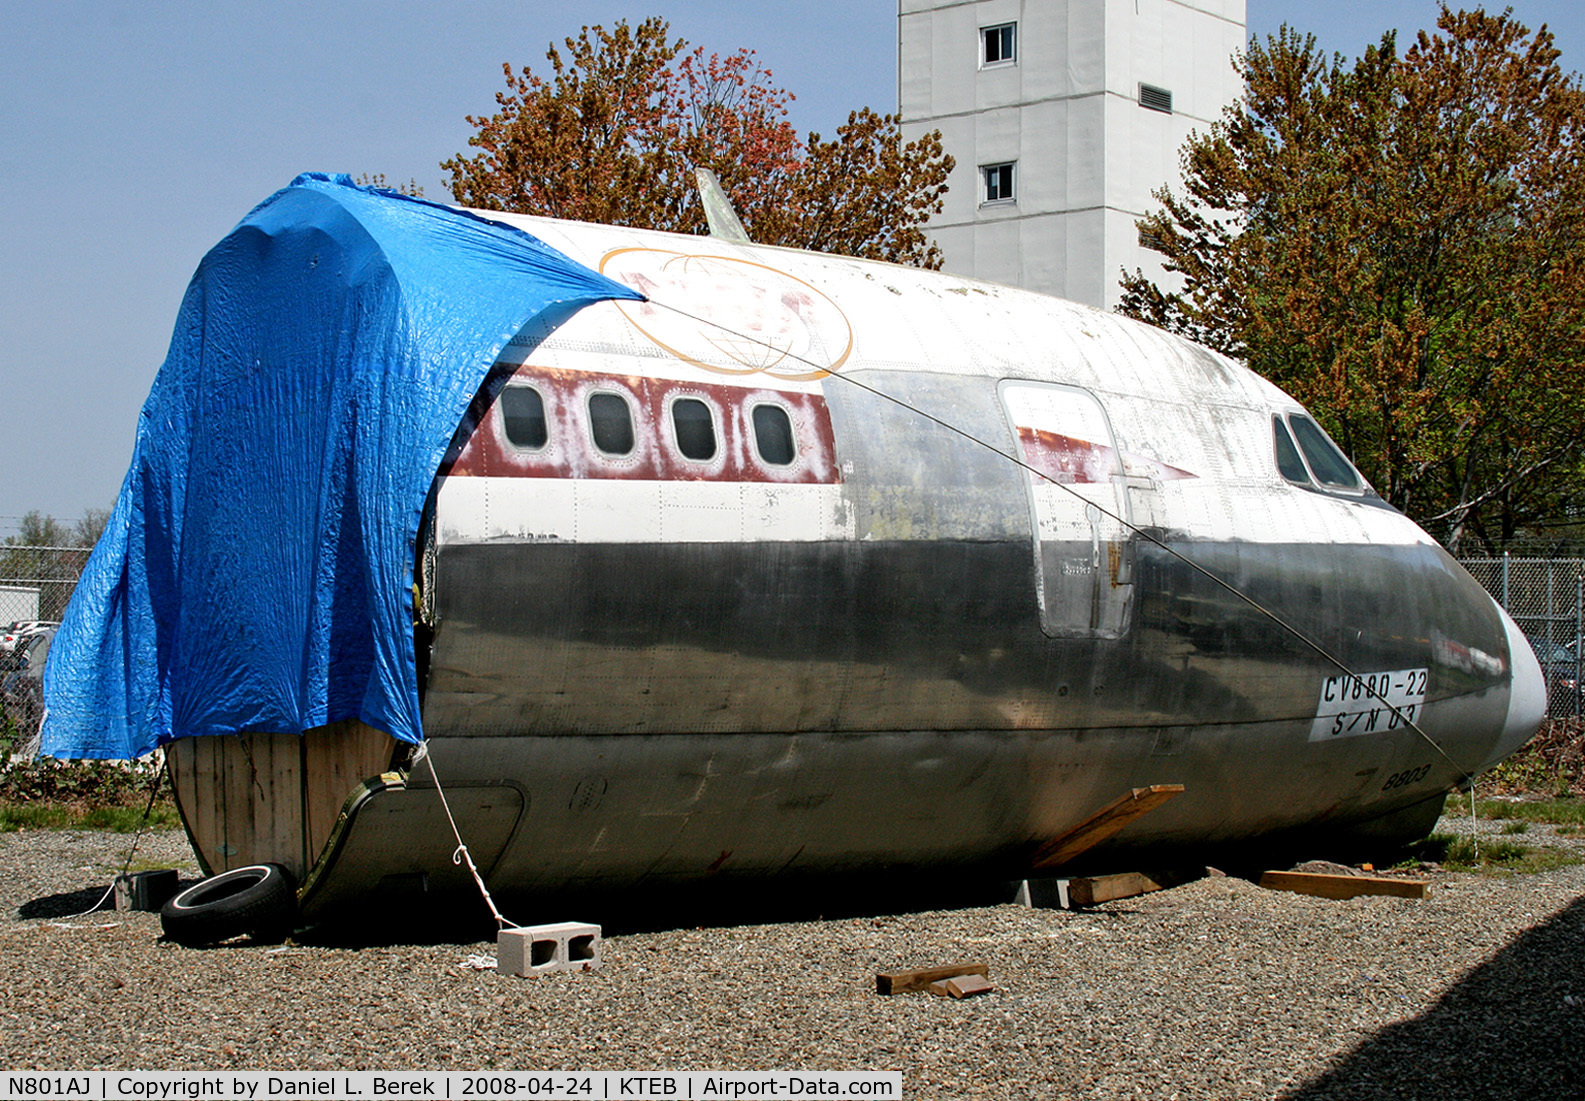 N801AJ, 1961 Convair 880-22-1 C/N 22-00-3, The Aviation Hall of New Jersey has finally acquired the nose section of this rare bird.  The cockpit is still in good condition and should be open to the public within the next year.  The rest of the aircraft succumbed to the scrapman at ACY.